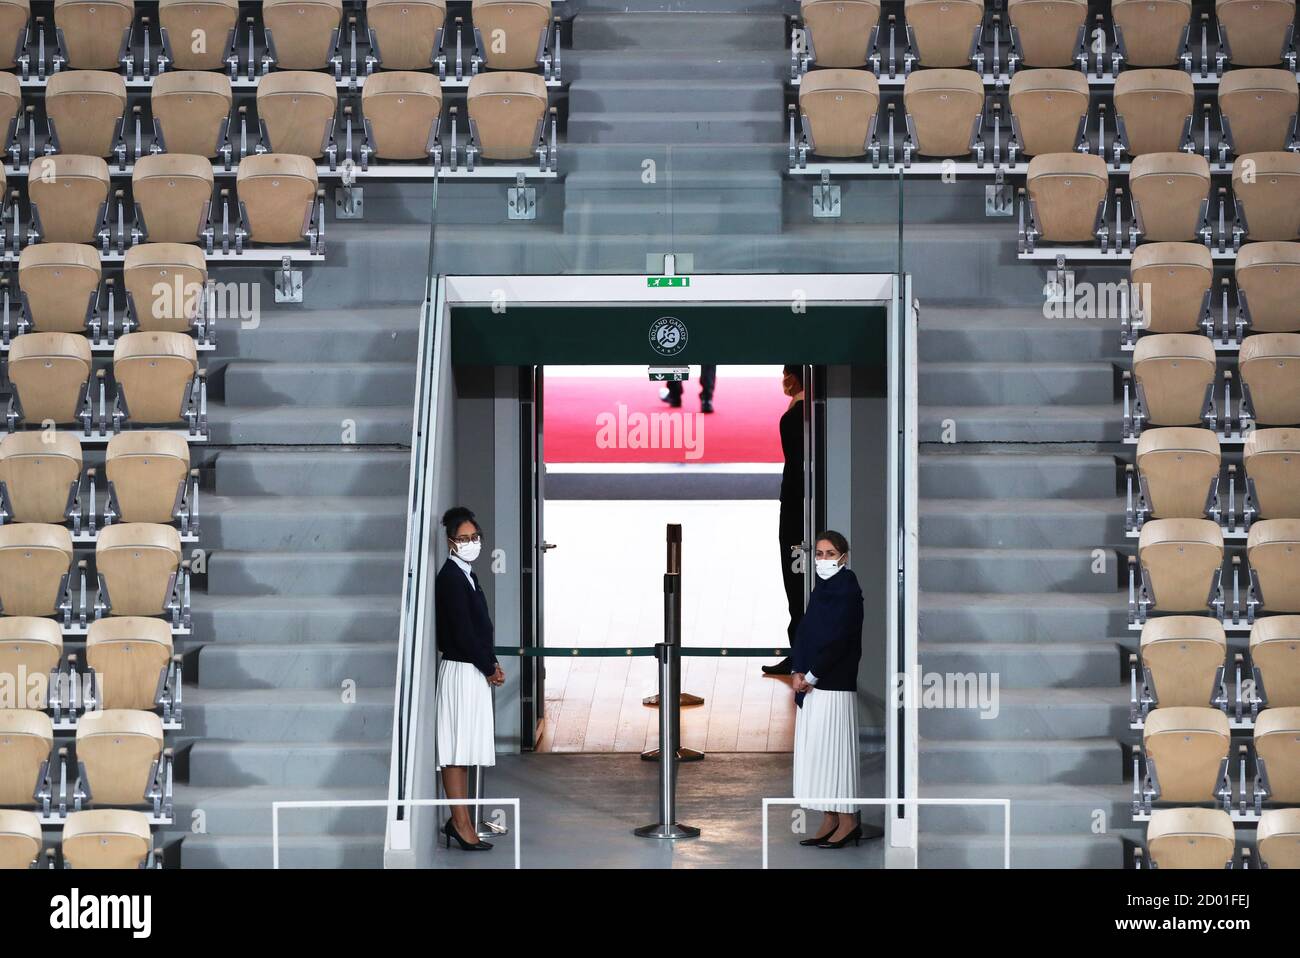 Paris, Paris, France. 2nd Oct, 2020. Staff members are seen during the men's singles third round match between Casper Ruud of Norway and Dominic Thiem of Austria at French Open tennis tournament 2020 at Roland Garros, in Paris, France on Oct. 2, 2020. Credit: Gao Jing/Xinhua/Alamy Live News Stock Photo